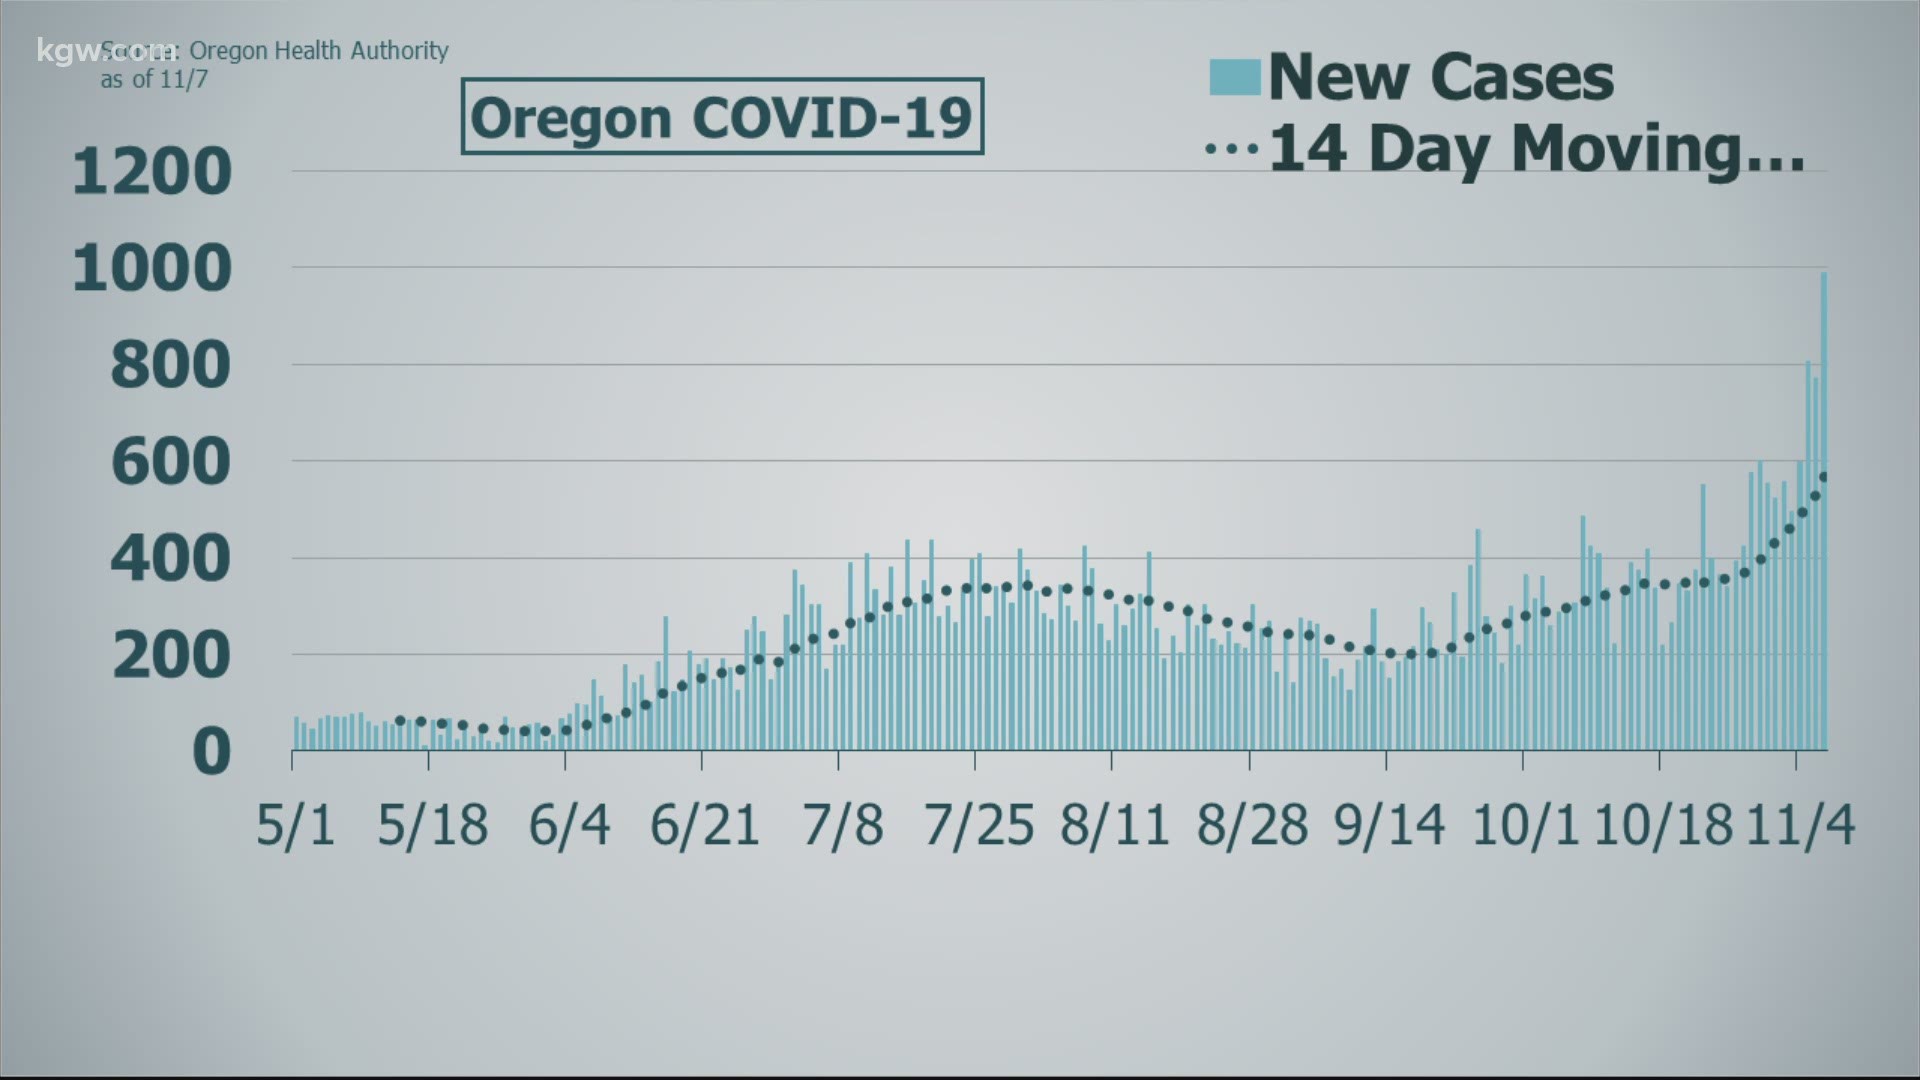 Saturday saw a new record-breaking high for COVID-19 cases in Oregon: 988.